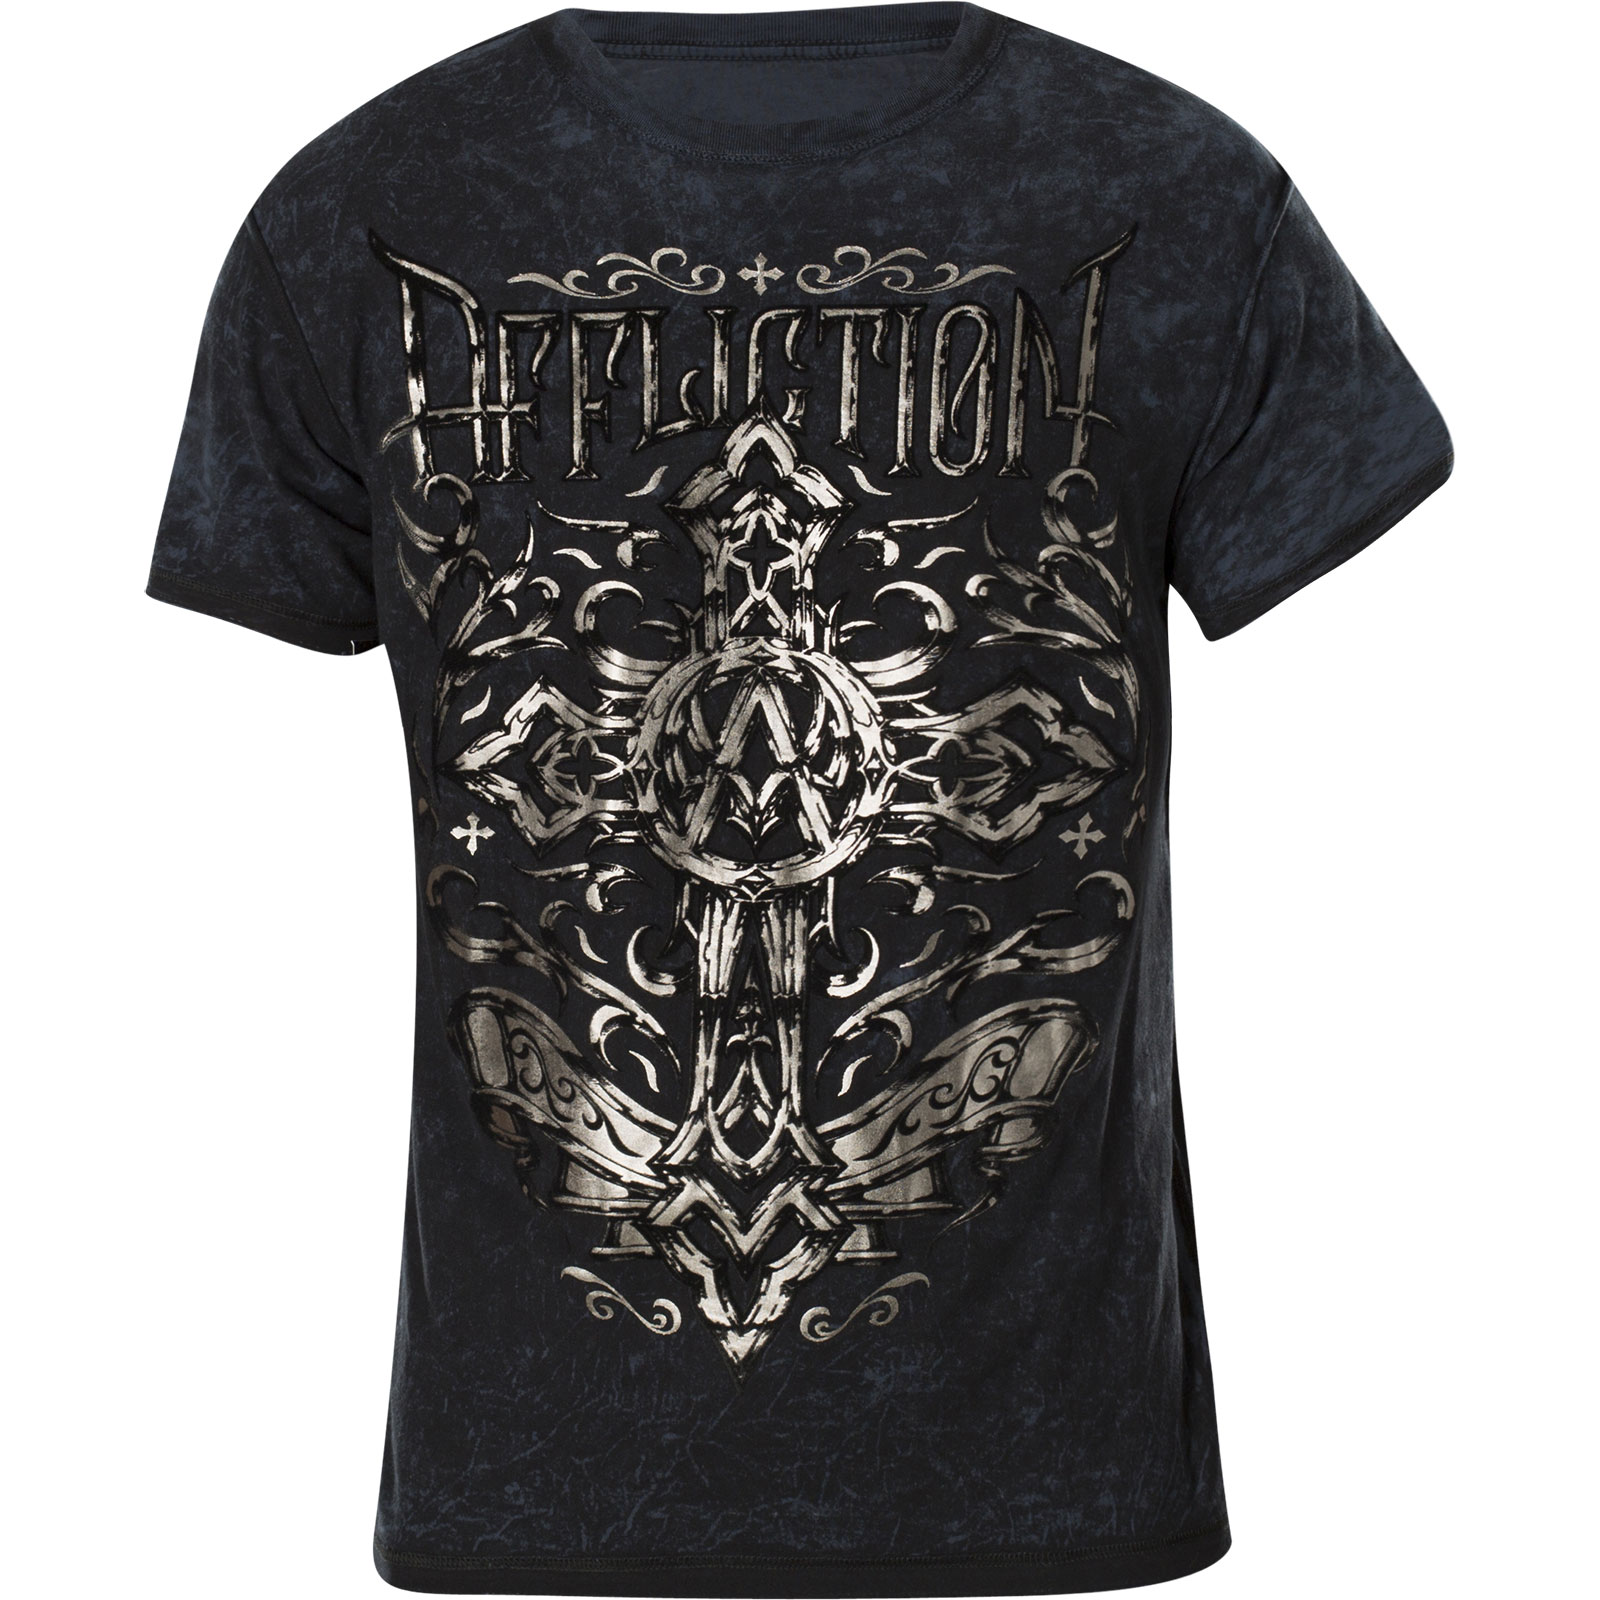 Affliction Chained Eagle Rev. T-Shirt with an ornamented skull